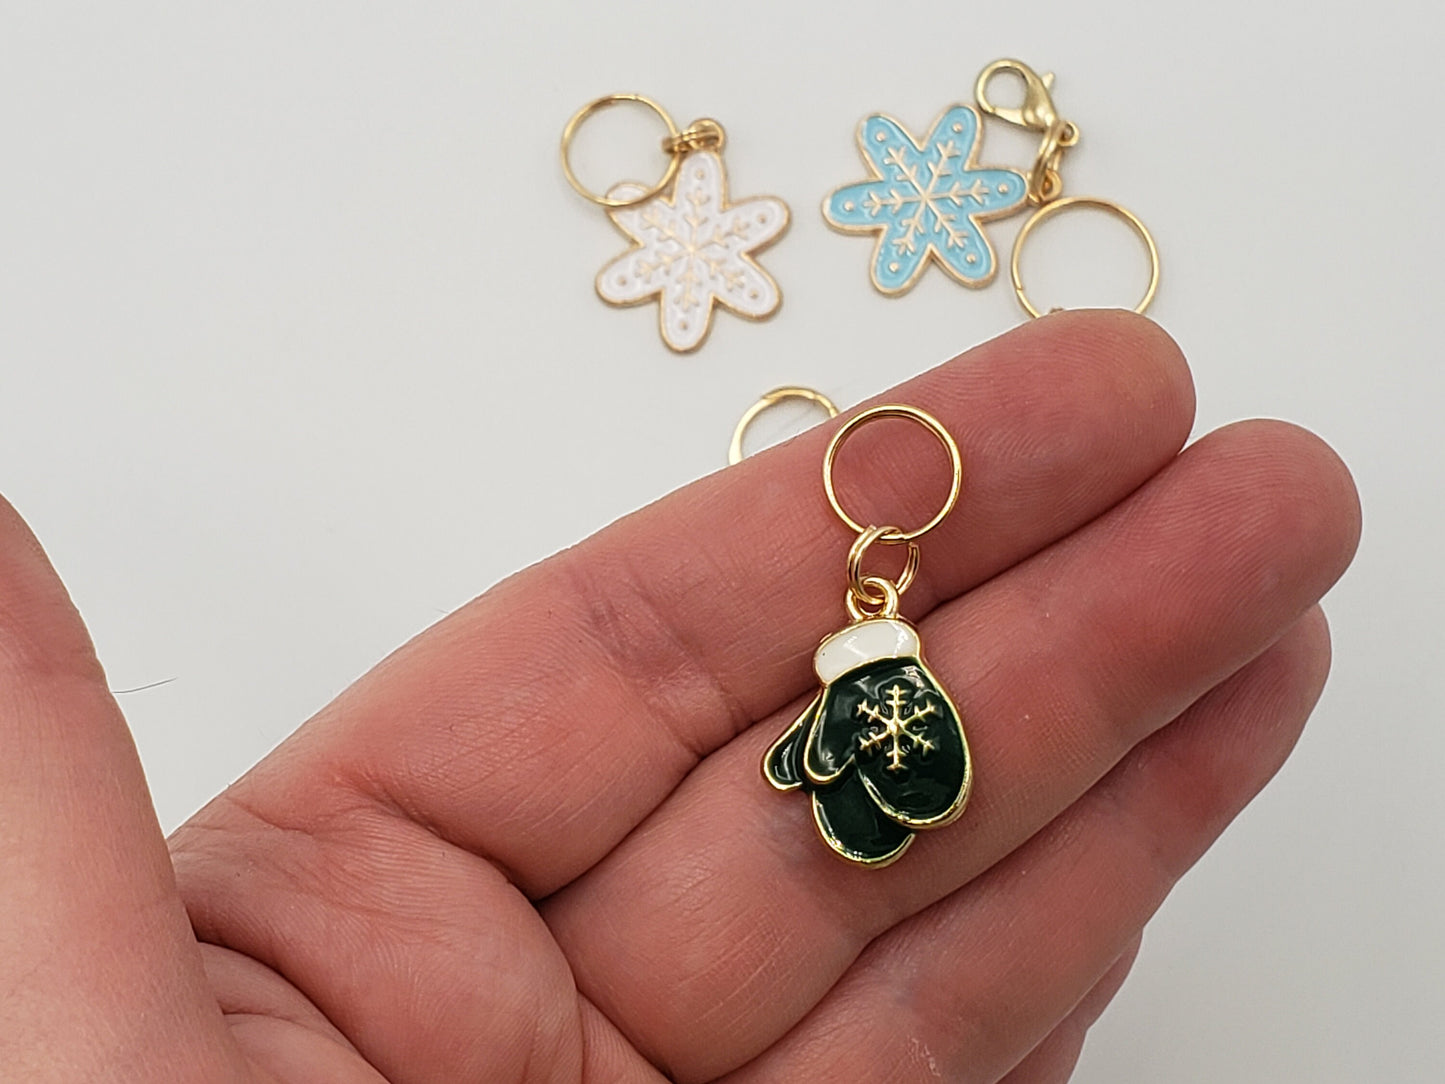 Snowy Stitch Markers for Knitting, 5pc set | Crochet stitch marker, progress keeper, project bag charms, crochet accessories